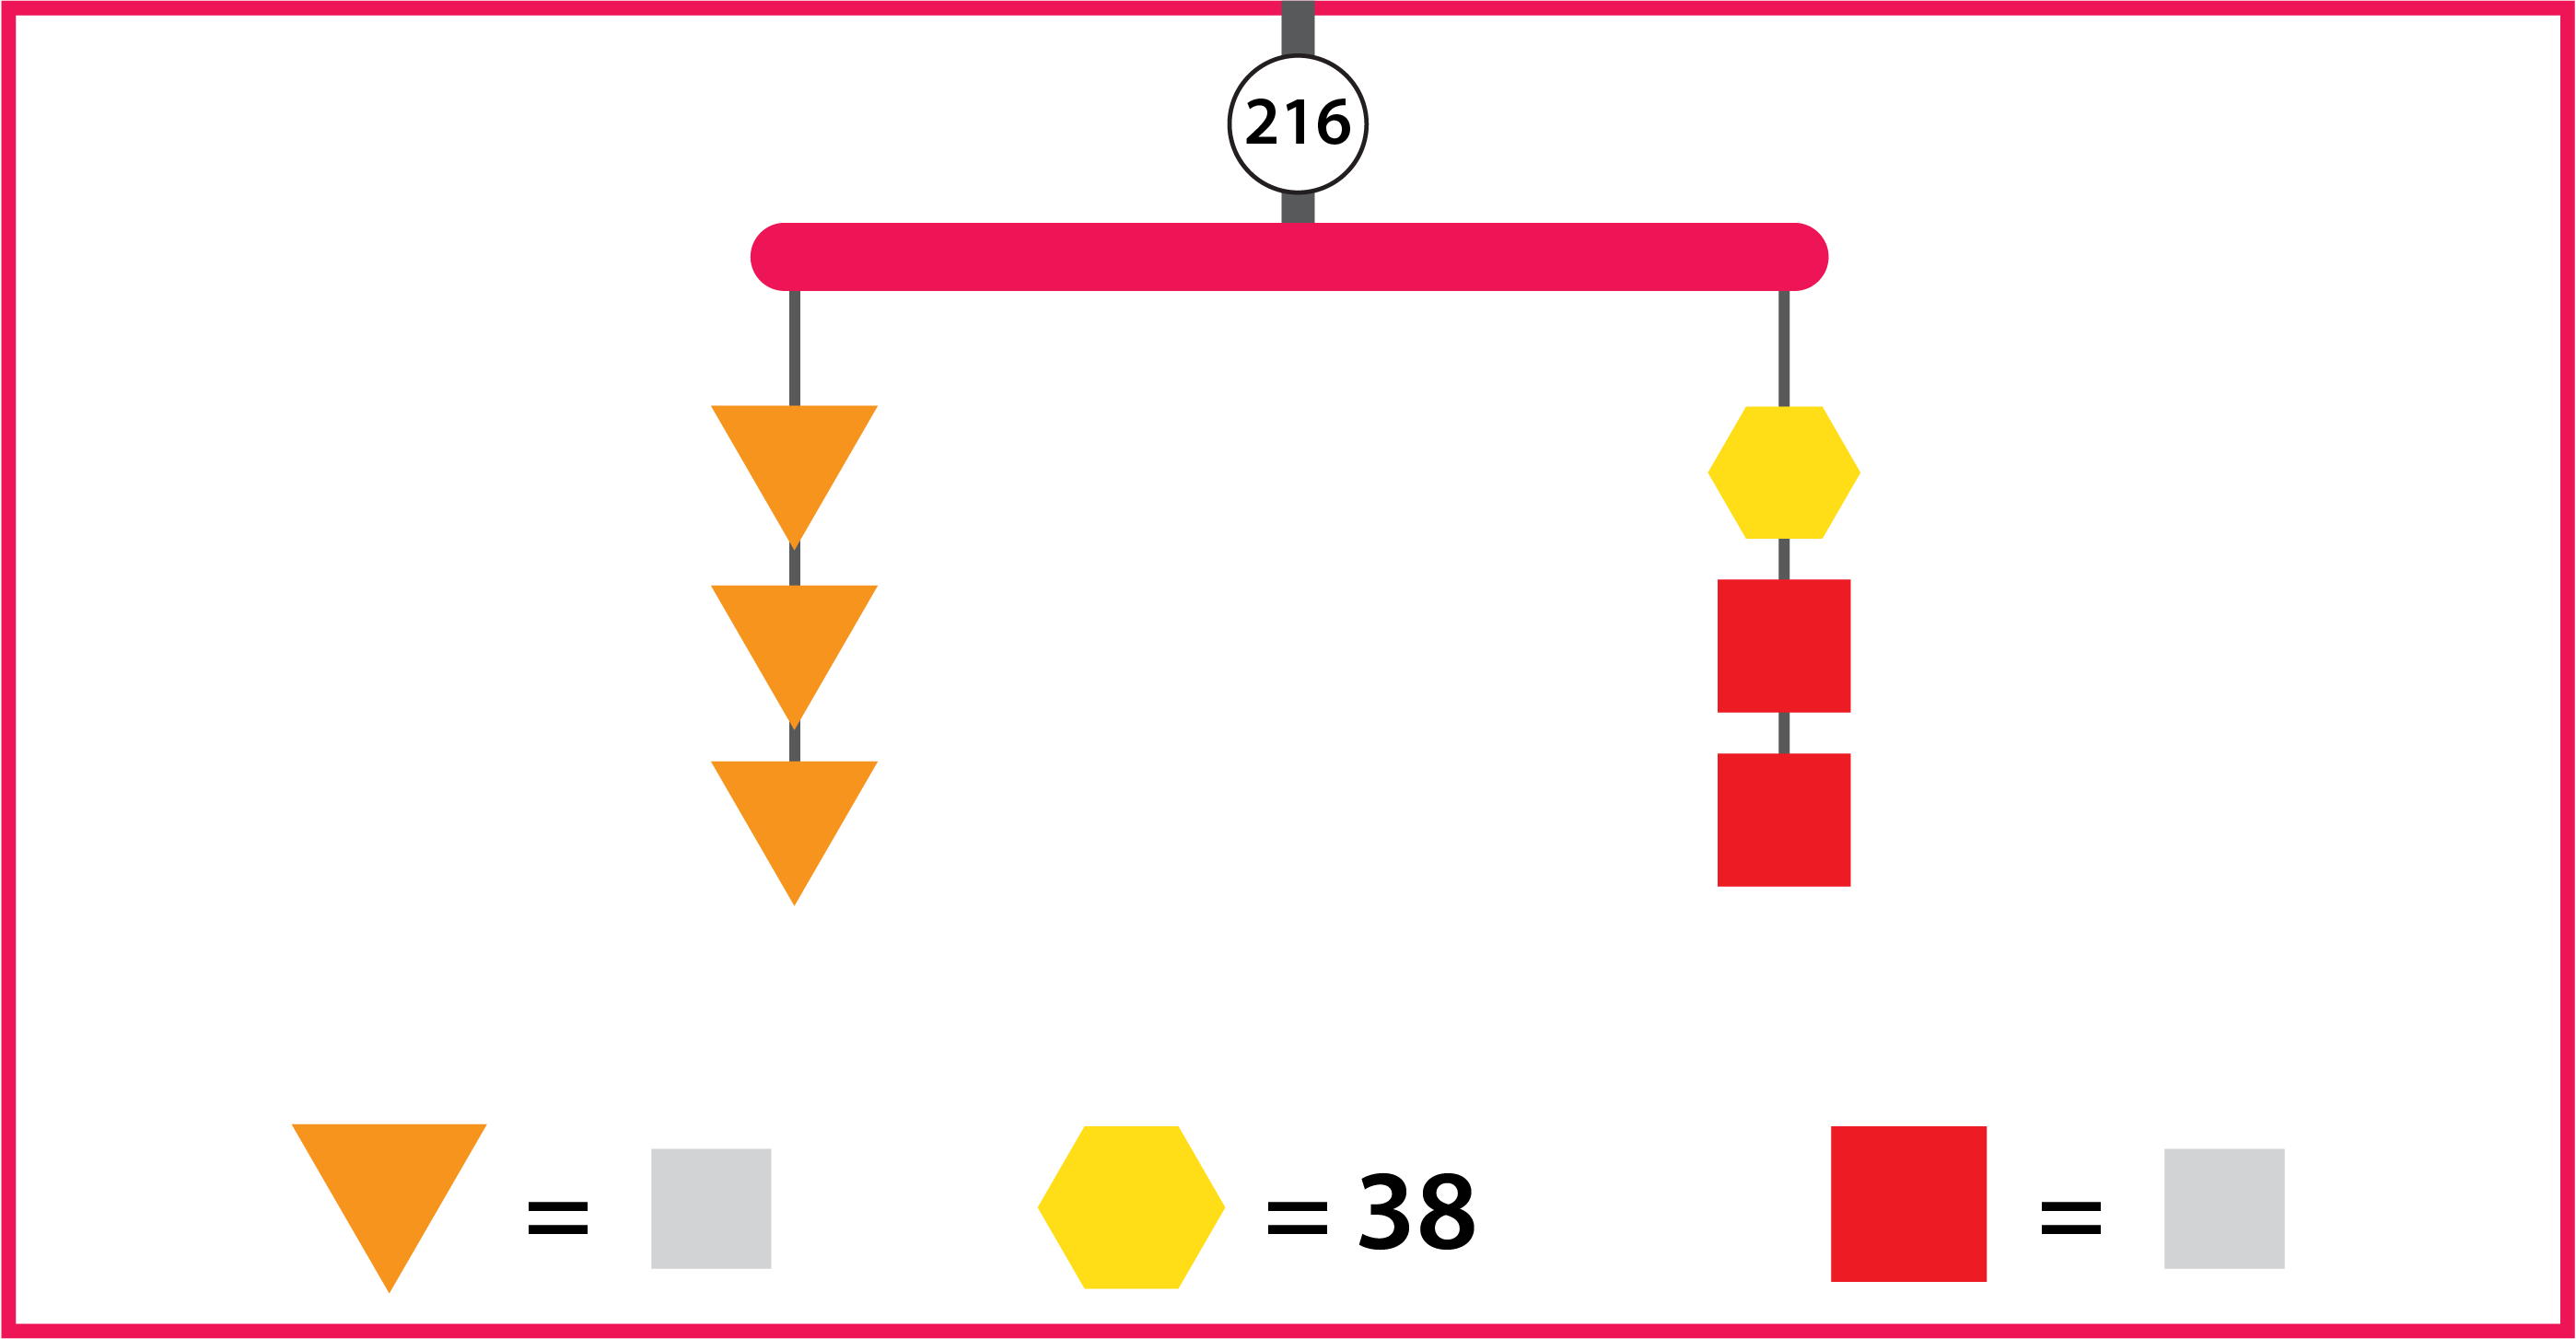 A balanced mobile with a value of 216 has 2 strings. The left string has 3 orange triangles. The right string has 2 red squares and 1 yellow hexagon. The value of the hexagon is 38.